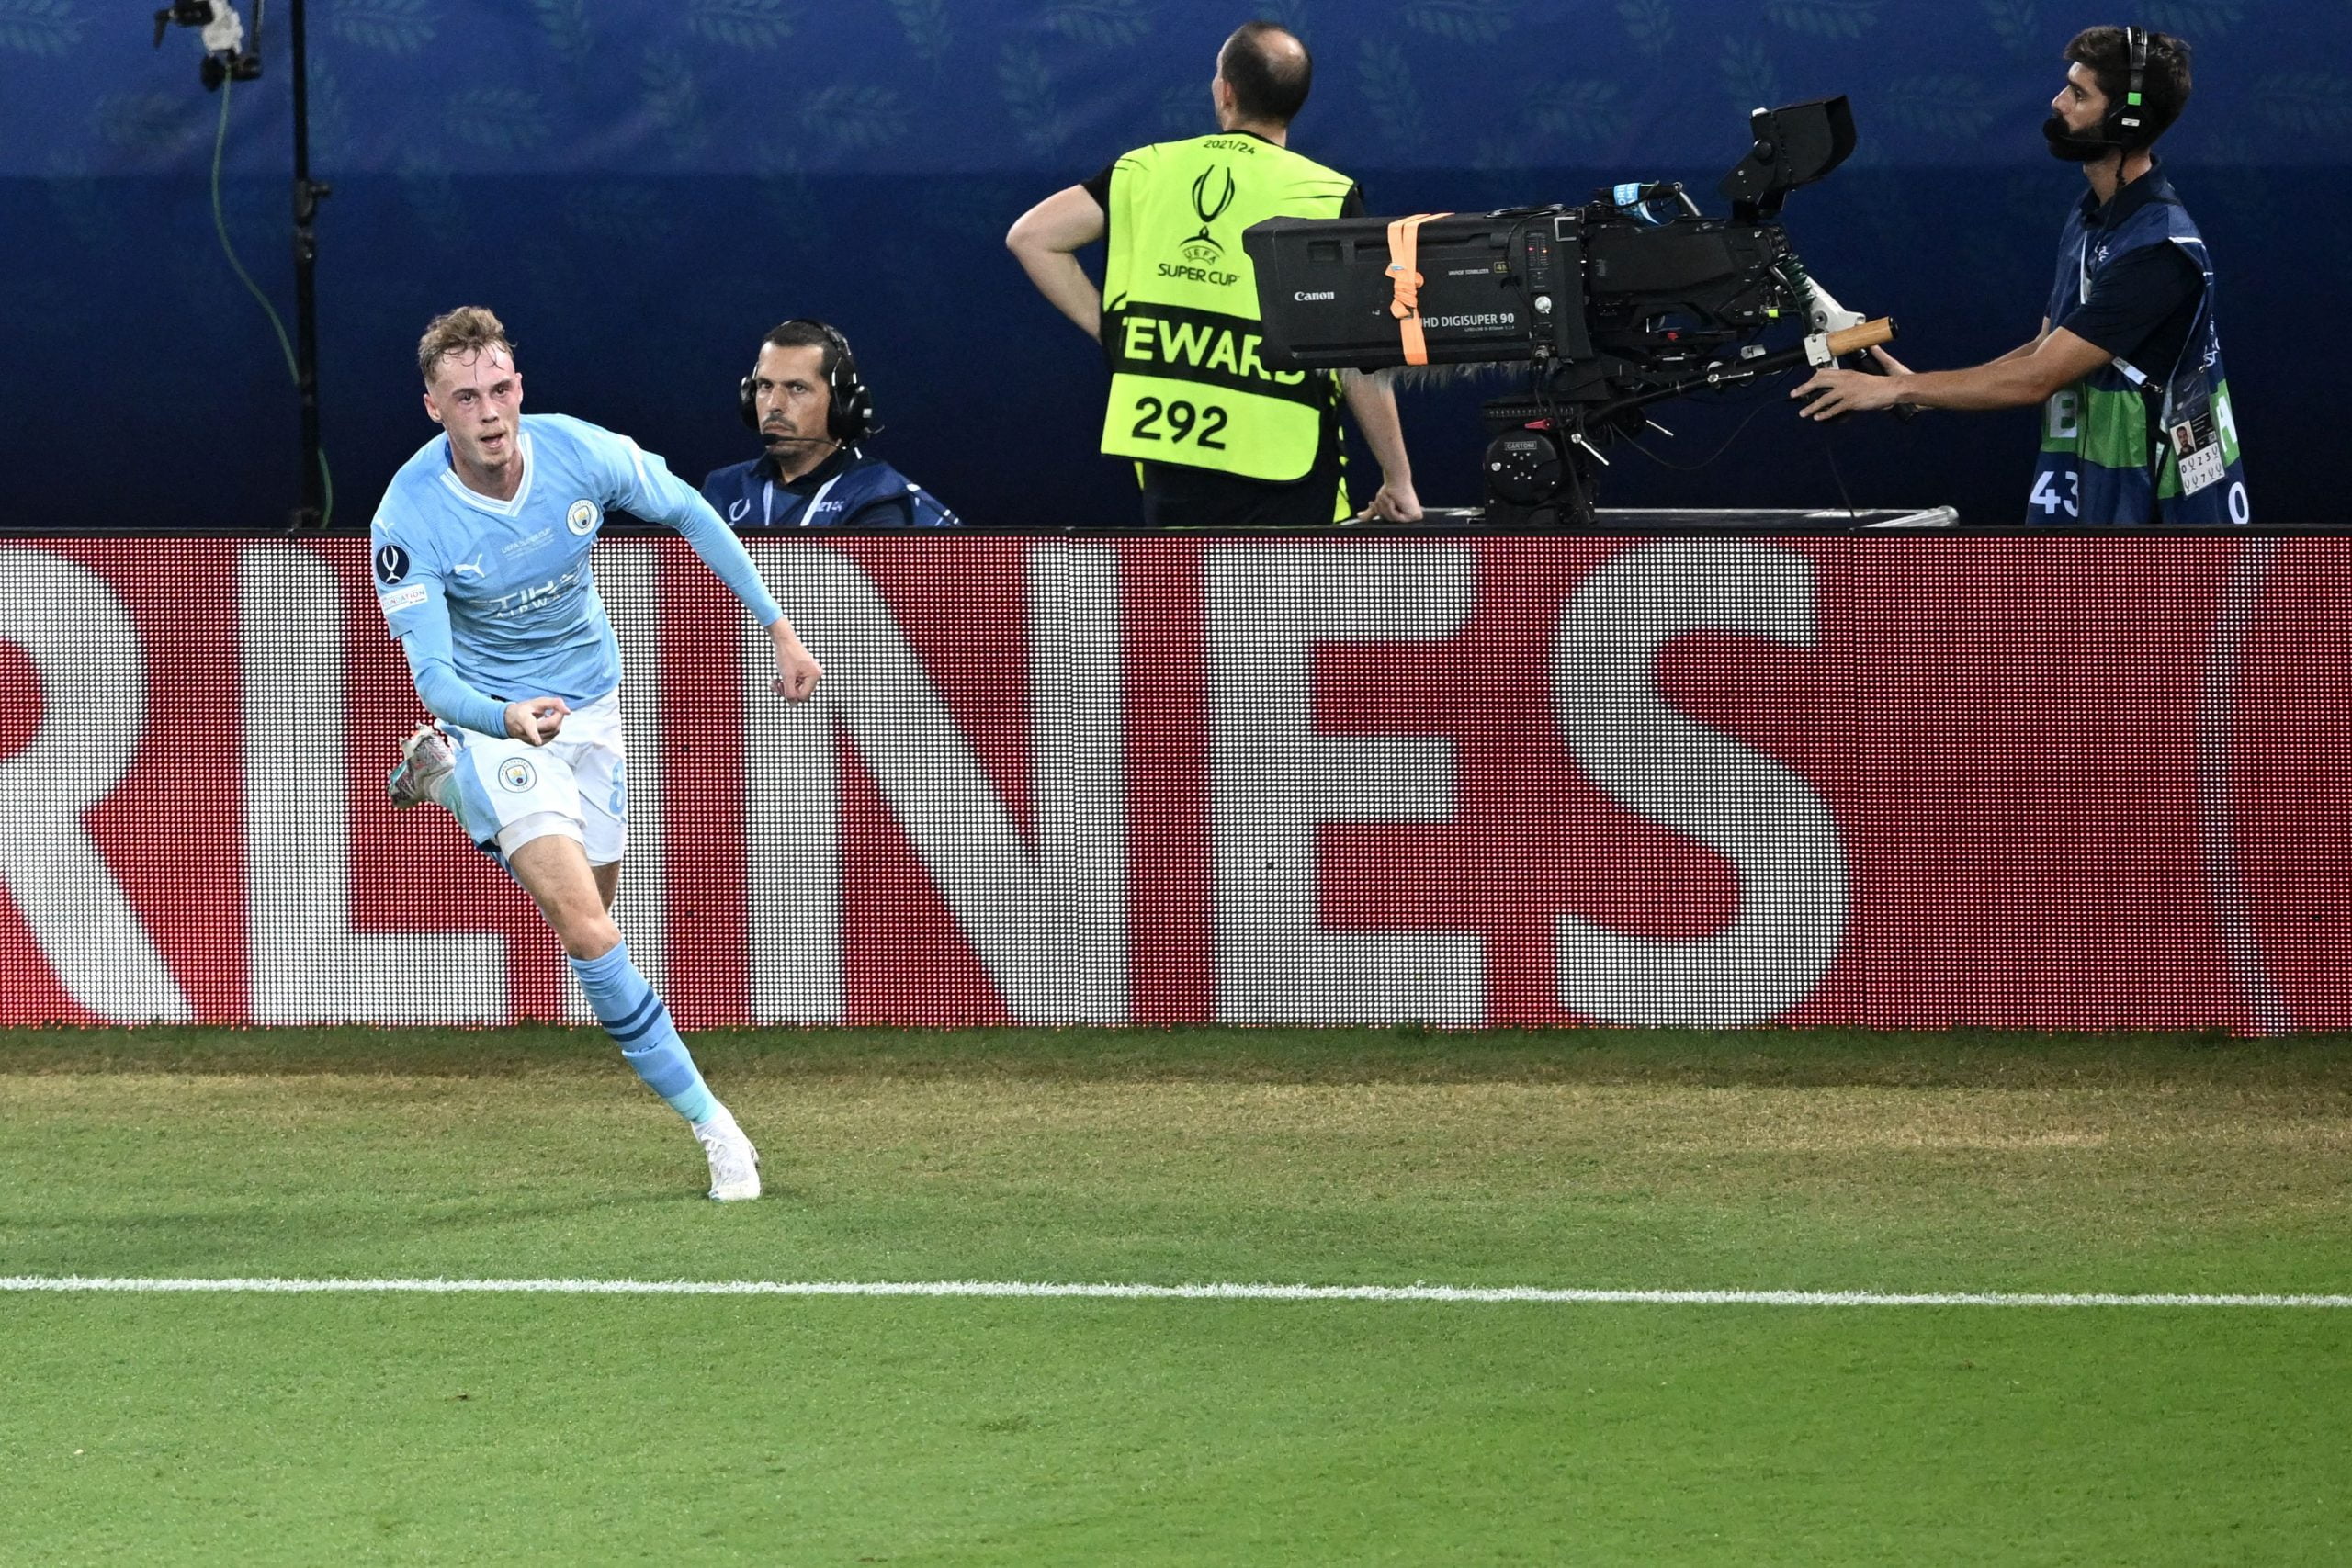 Manchester City's English midfielder #80 Cole Palmer celebrates scoring his team's first goal during the 2023 UEFA Super Cup football match between Manchester City and Sevilla at the Georgios Karaiskakis Stadium in Piraeus on August 16, 2023. (Photo by Angelos Tzortzinis / AFP) (Photo by ANGELOS TZORTZINIS/AFP via Getty Images)